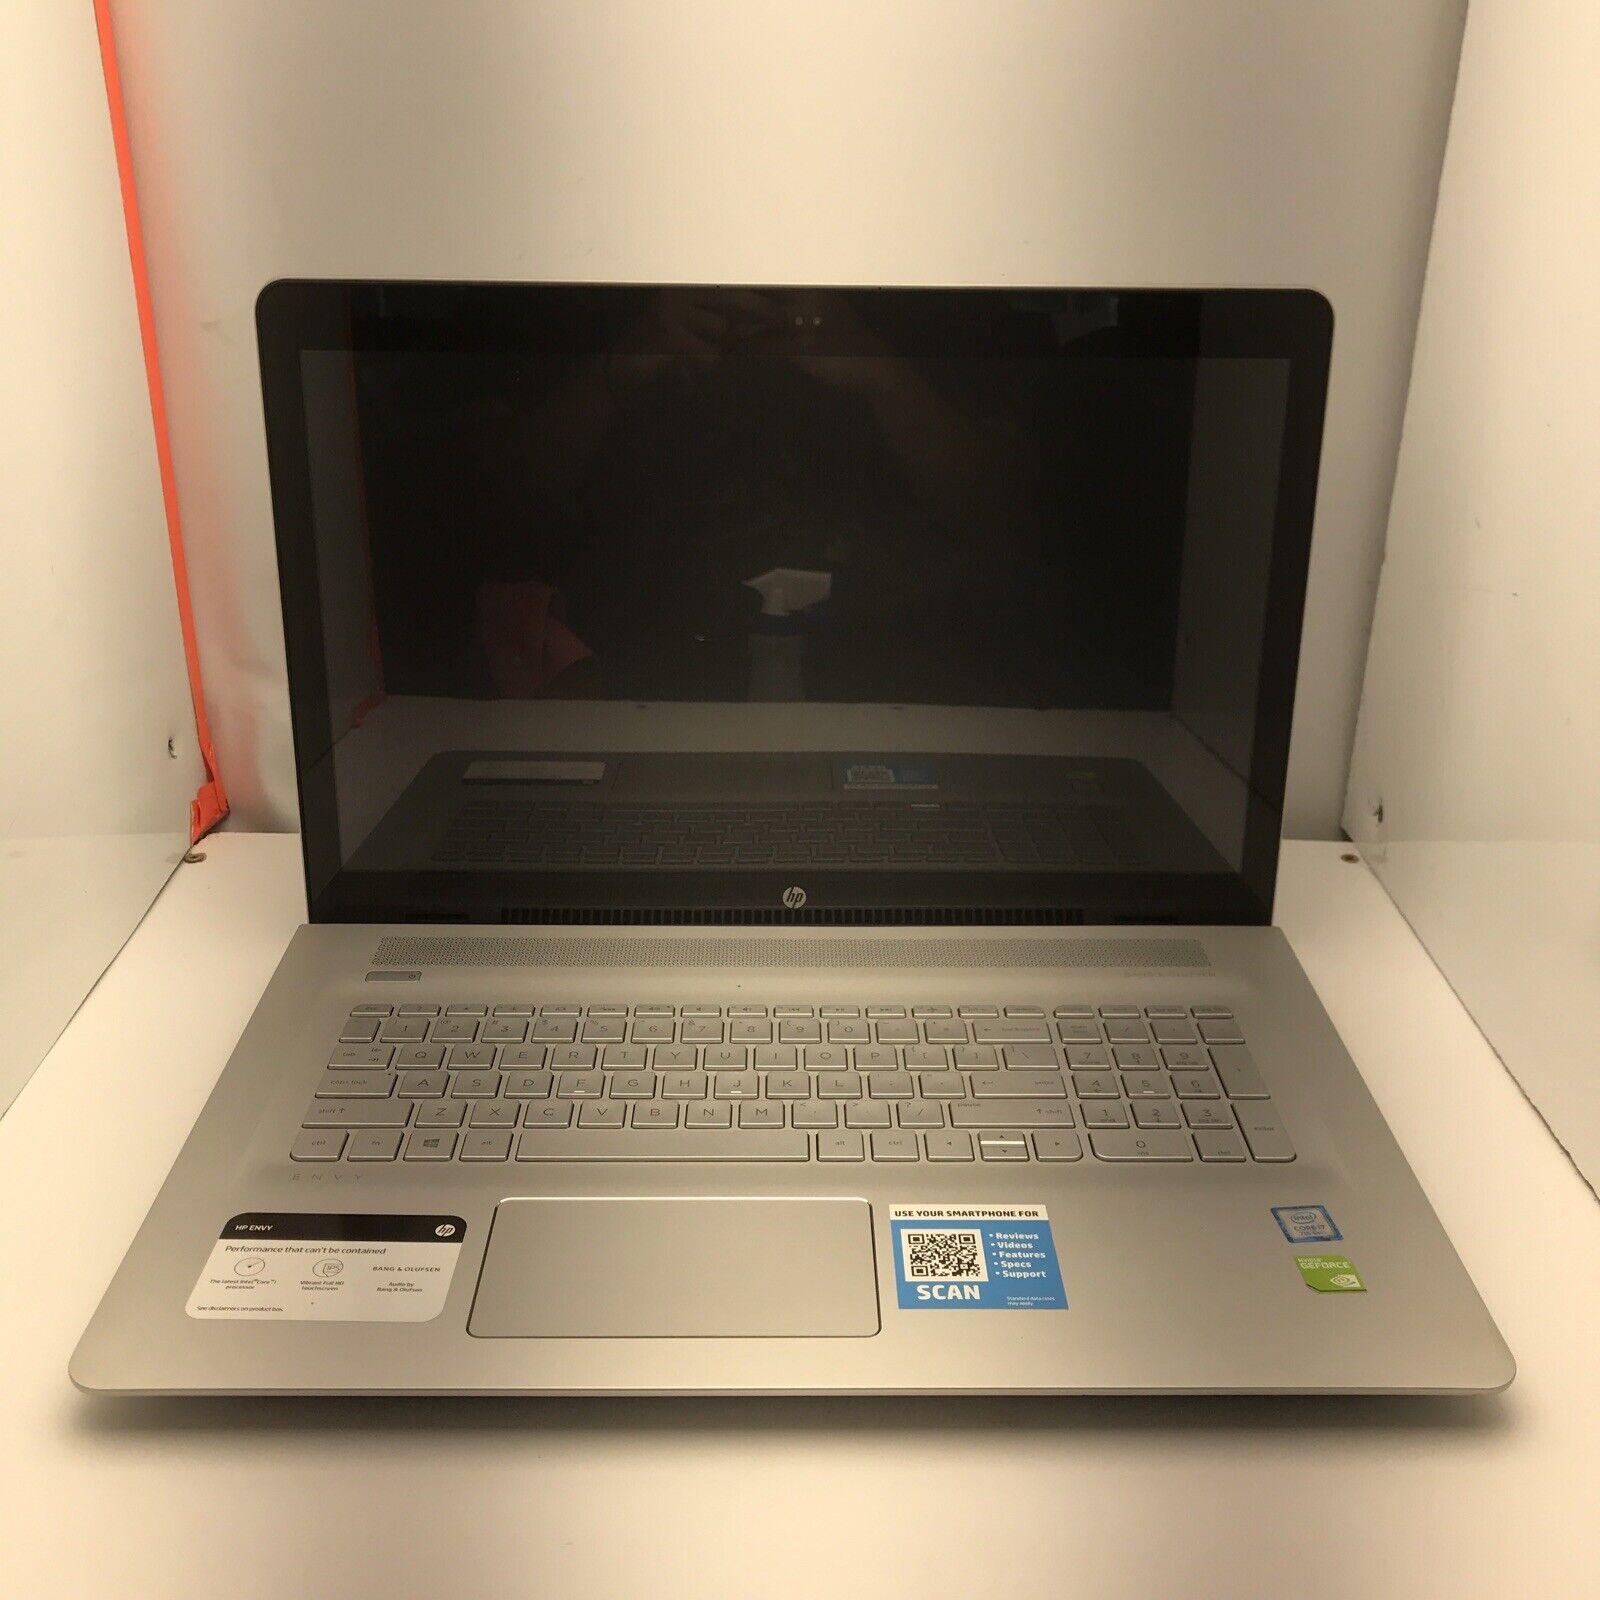 HP ENVY M7-U109DX i7 7th Gen NOT WORKING FOR PARTS